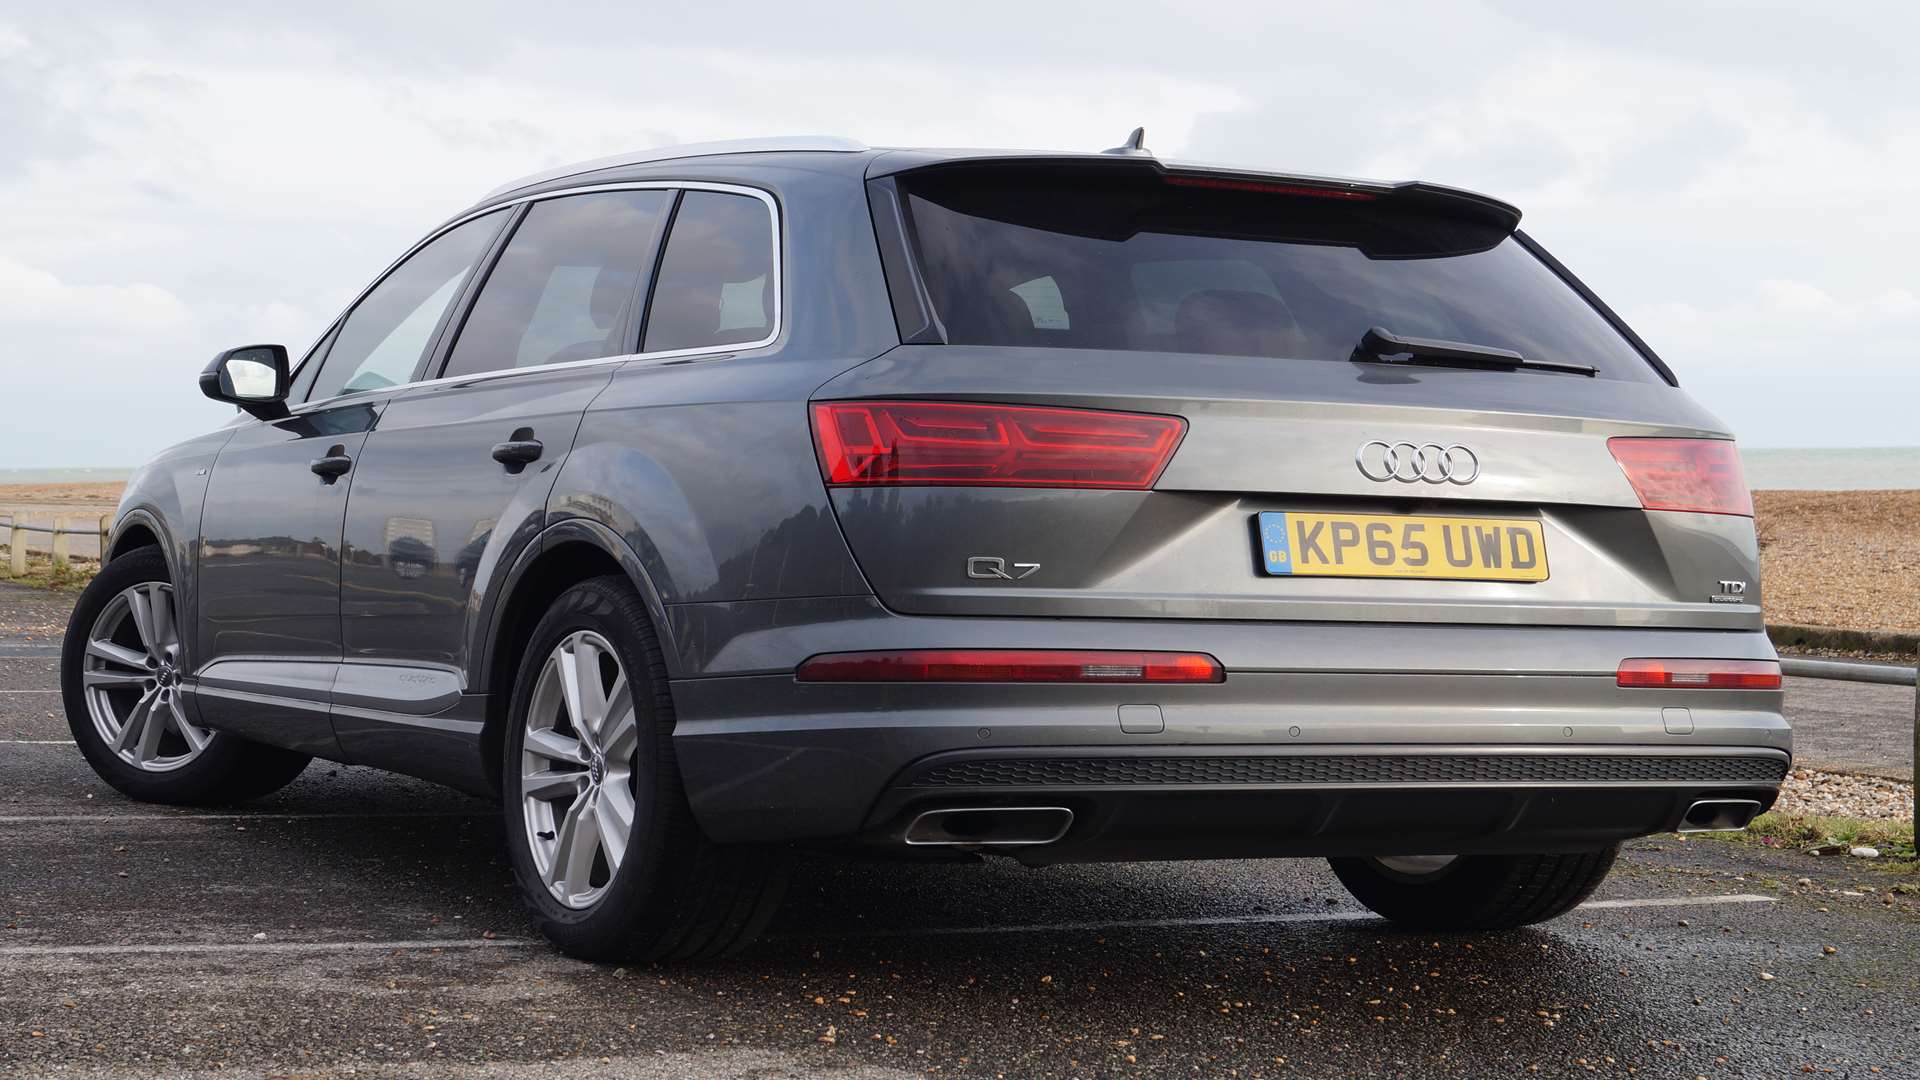 The rear styling is simple, unfussy